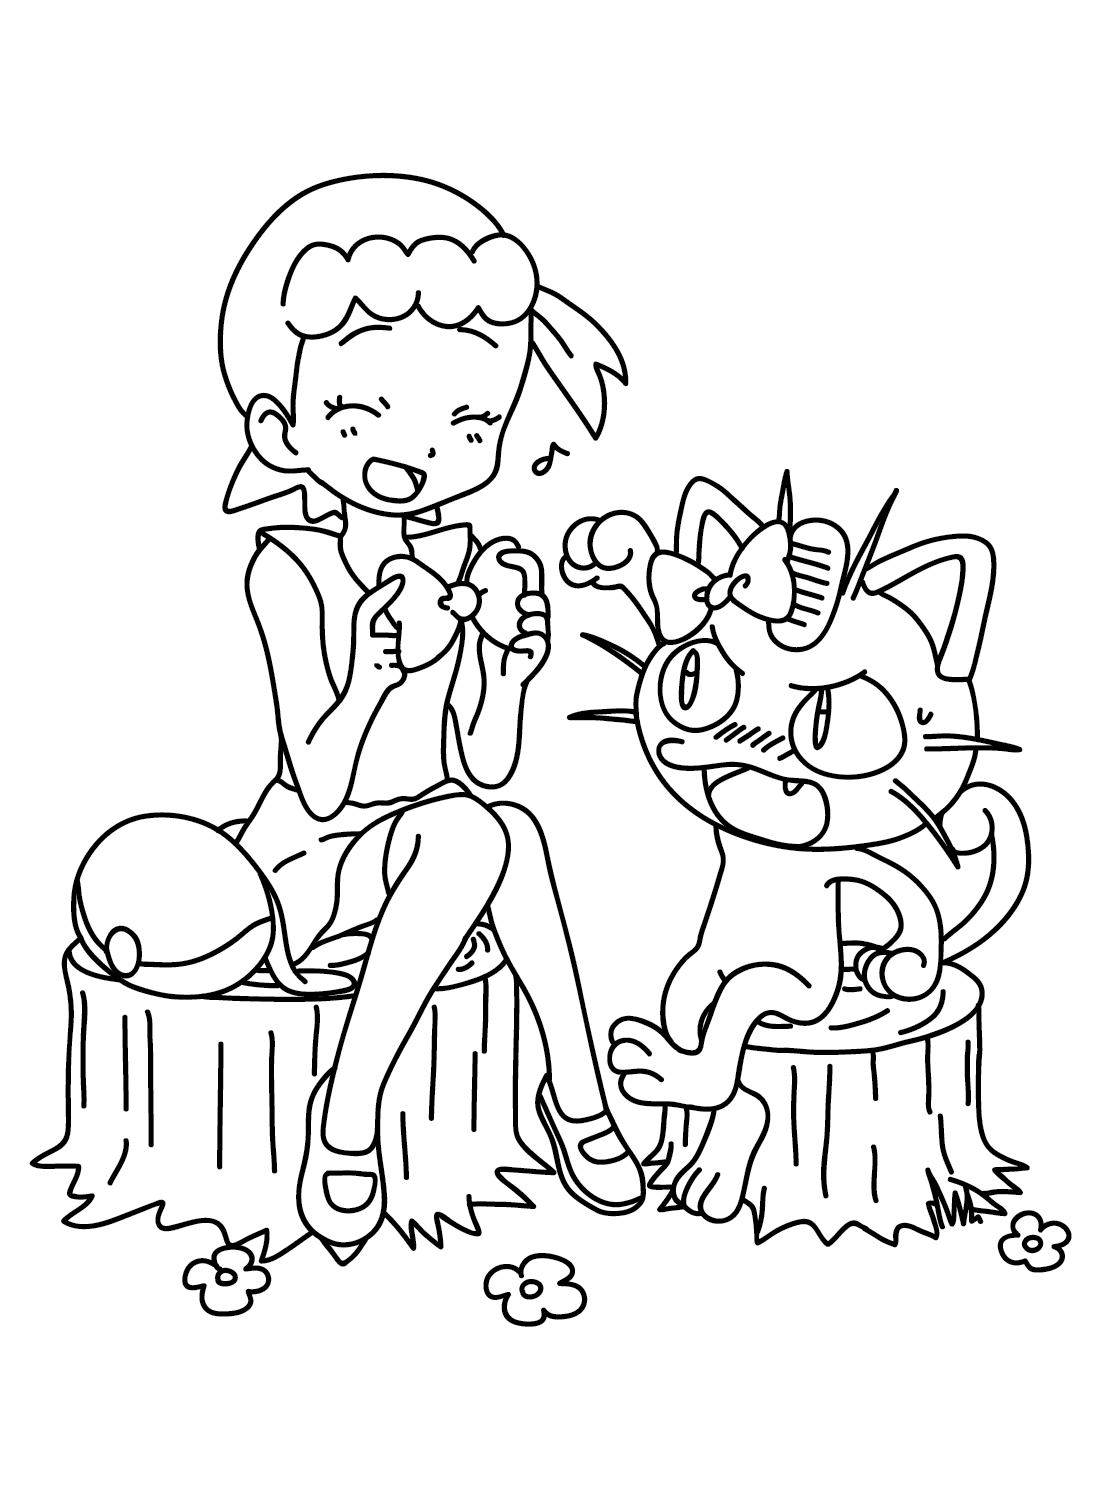 Bonnie Pokemon and Meowth Coloring Page from Bonnie Pokemon